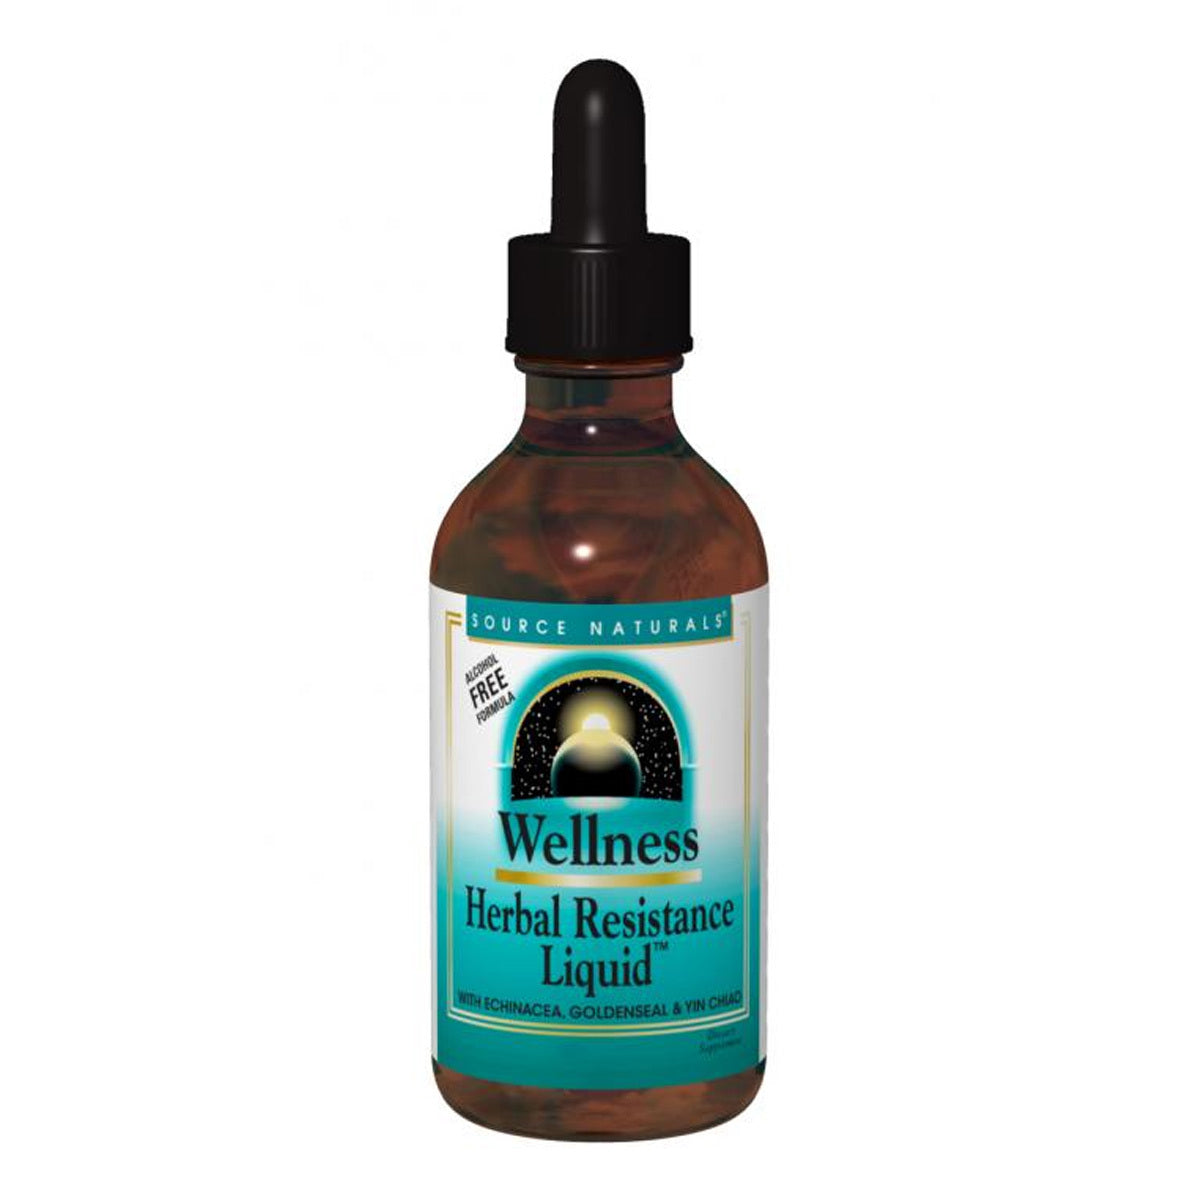 Primary image of Wellness Herbal Resistance (Alcohol Free)